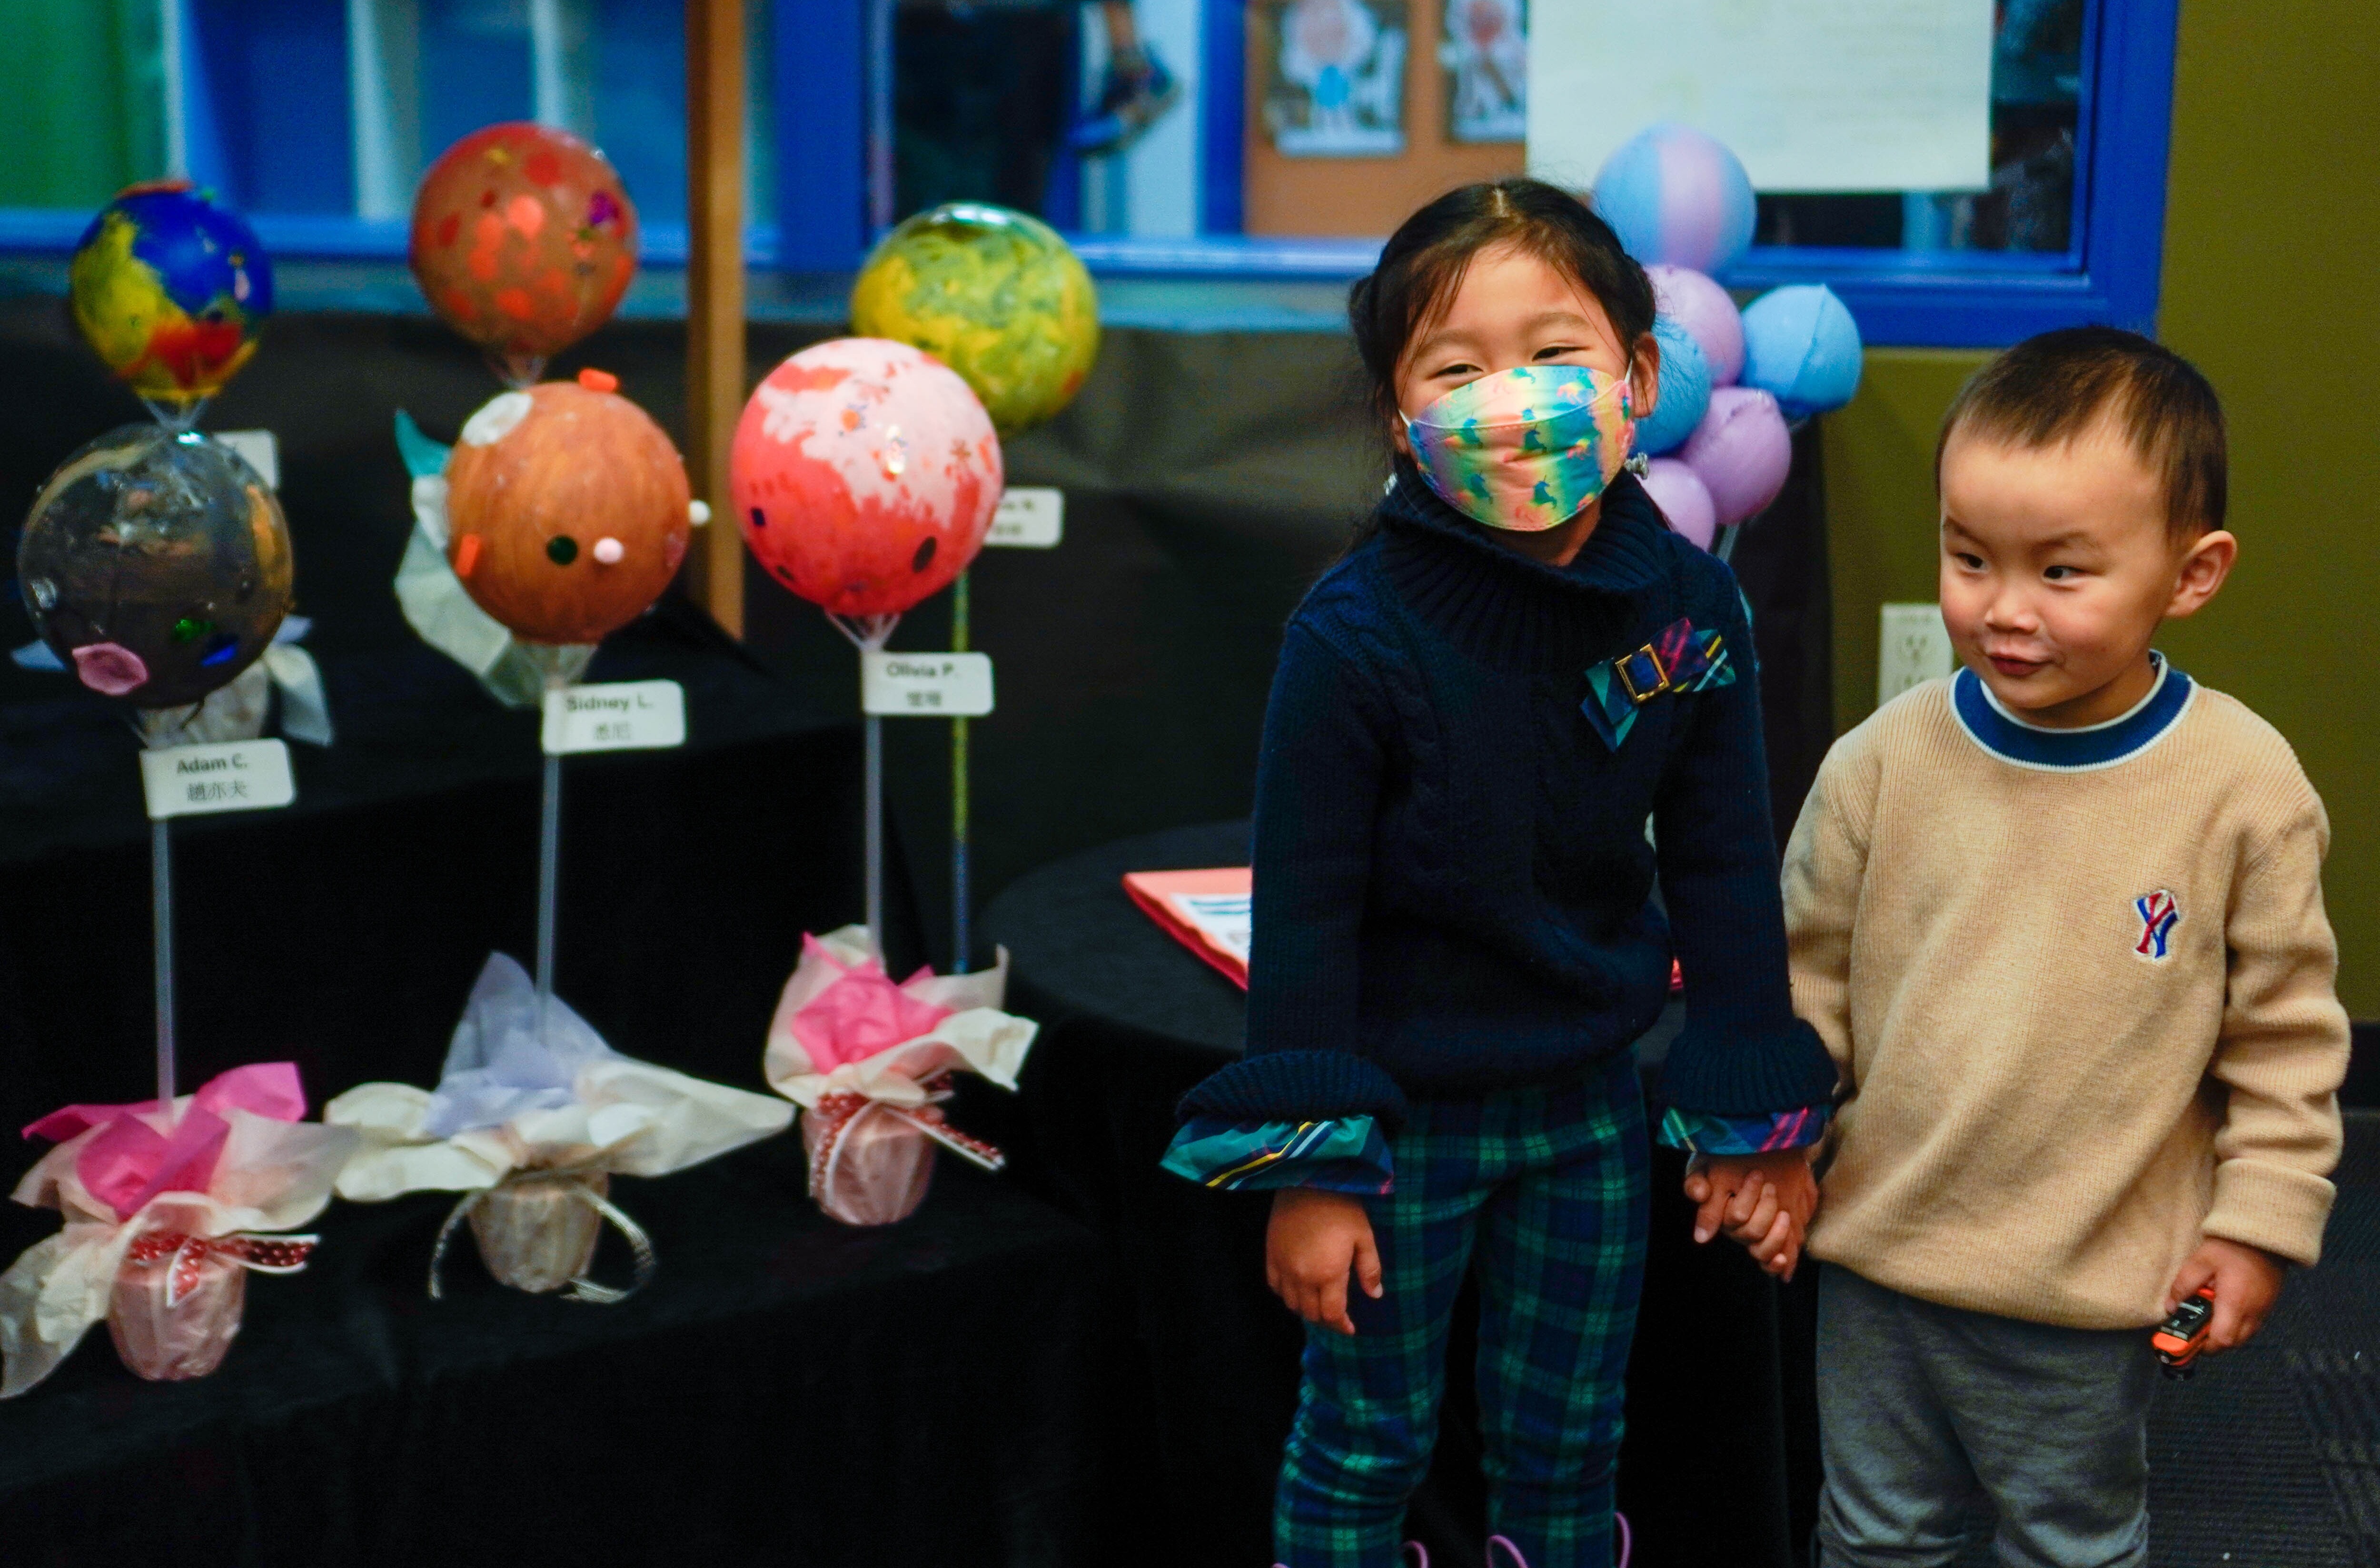 Two young children in front of the paper mache planet display.